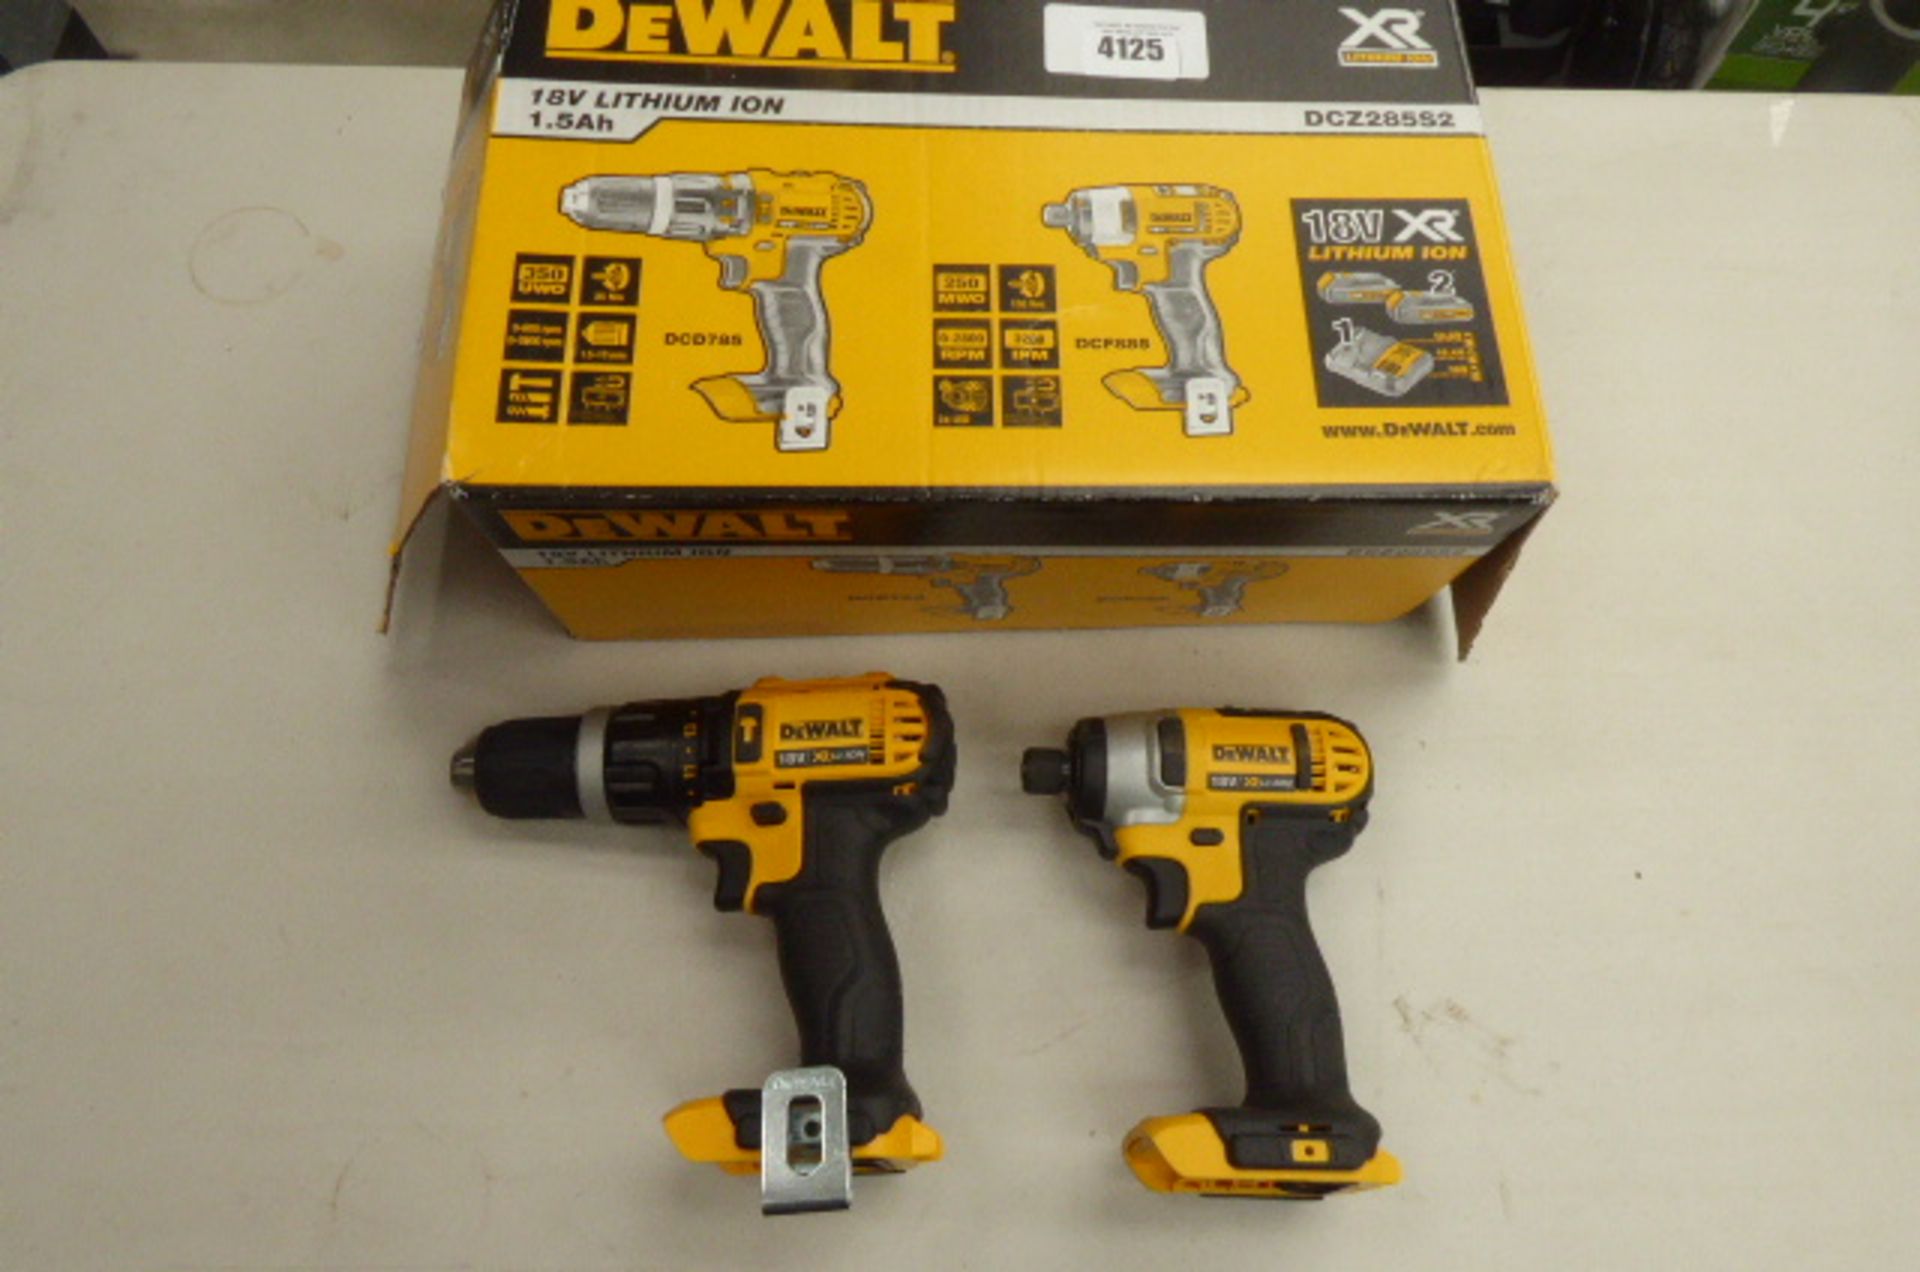 Boxed Dewalt set of 2 drills (no battery pack or charger)